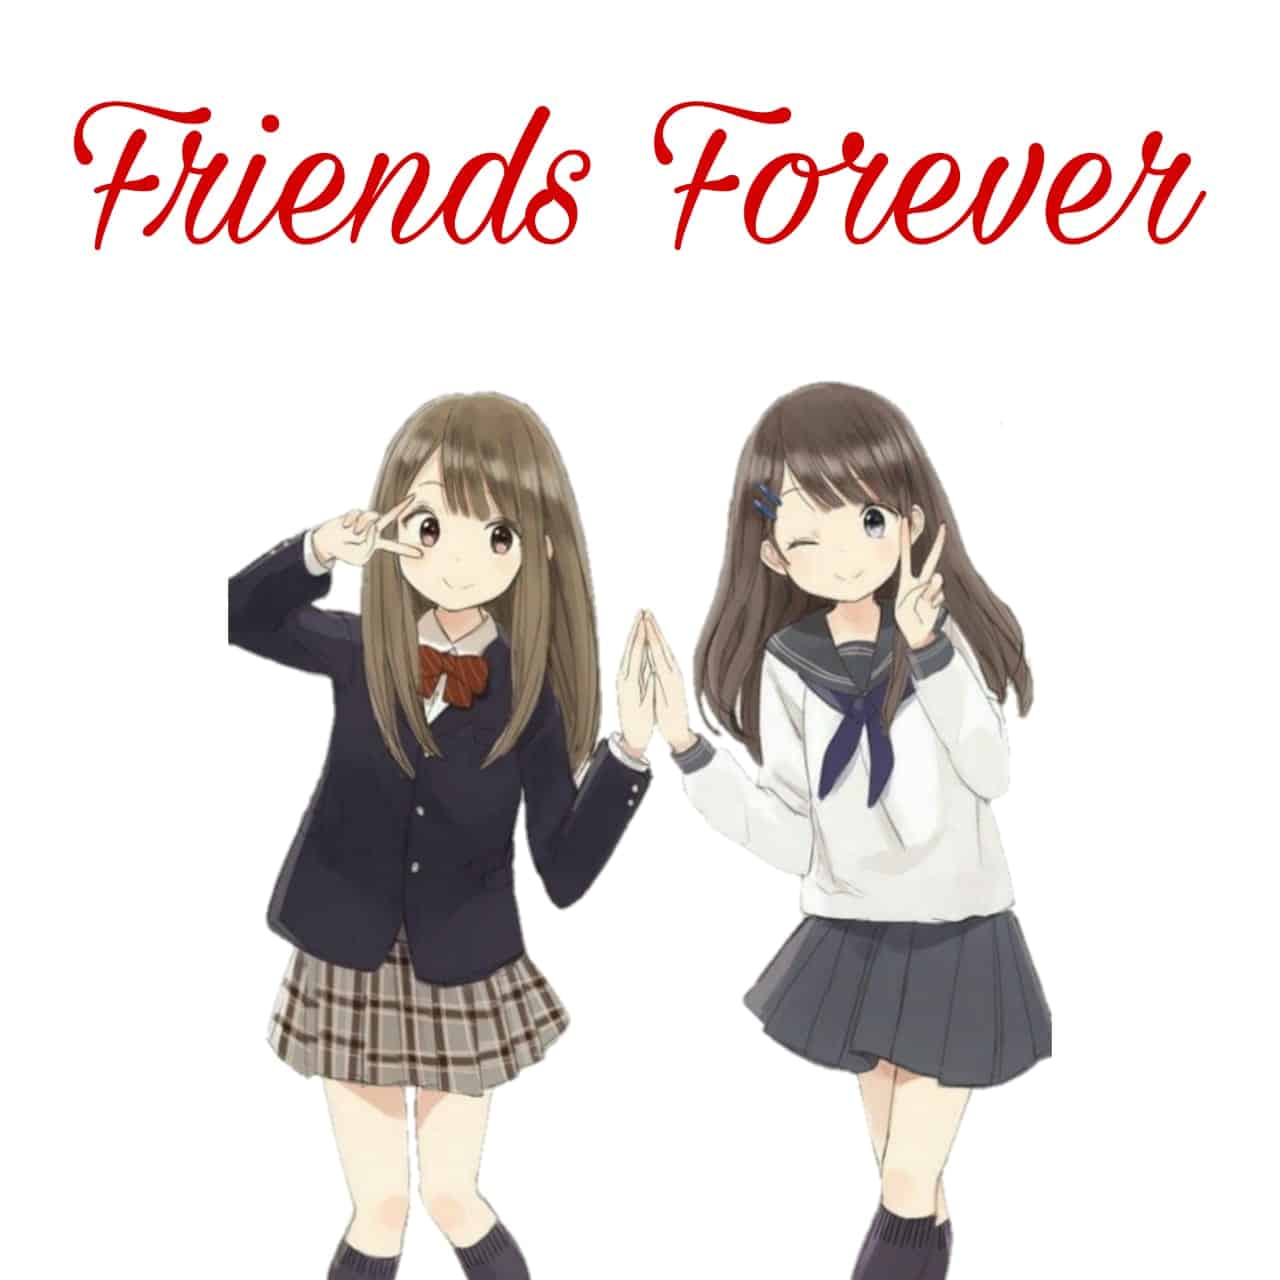 Profile Friends Forever DP